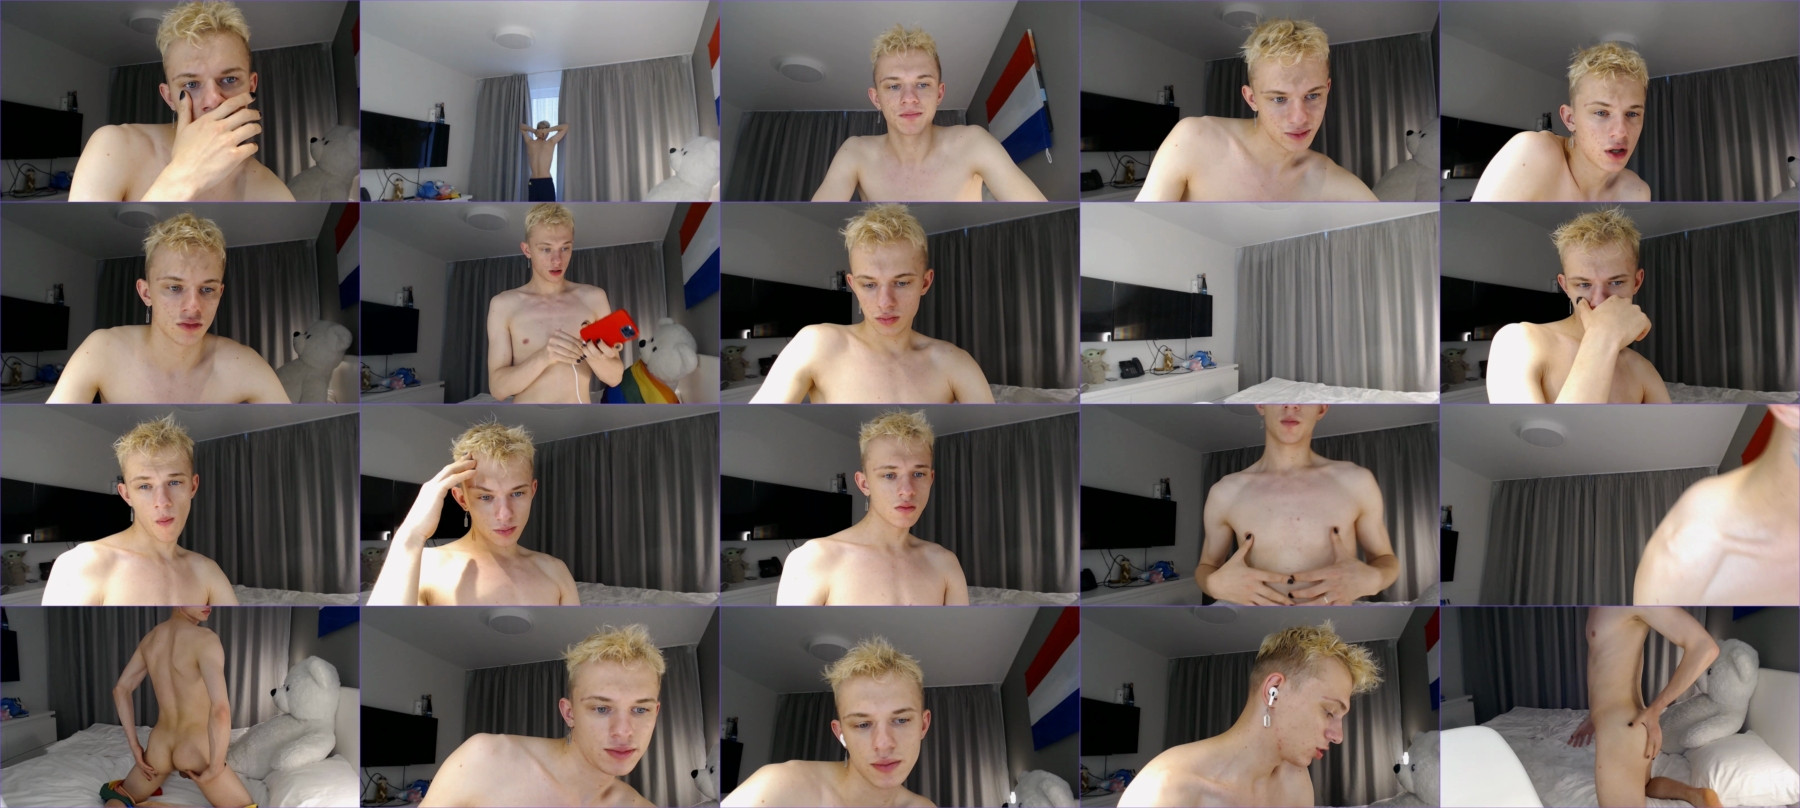 Andy_Bjorn Wet CAM SHOW @ Chaturbate 29-06-2021